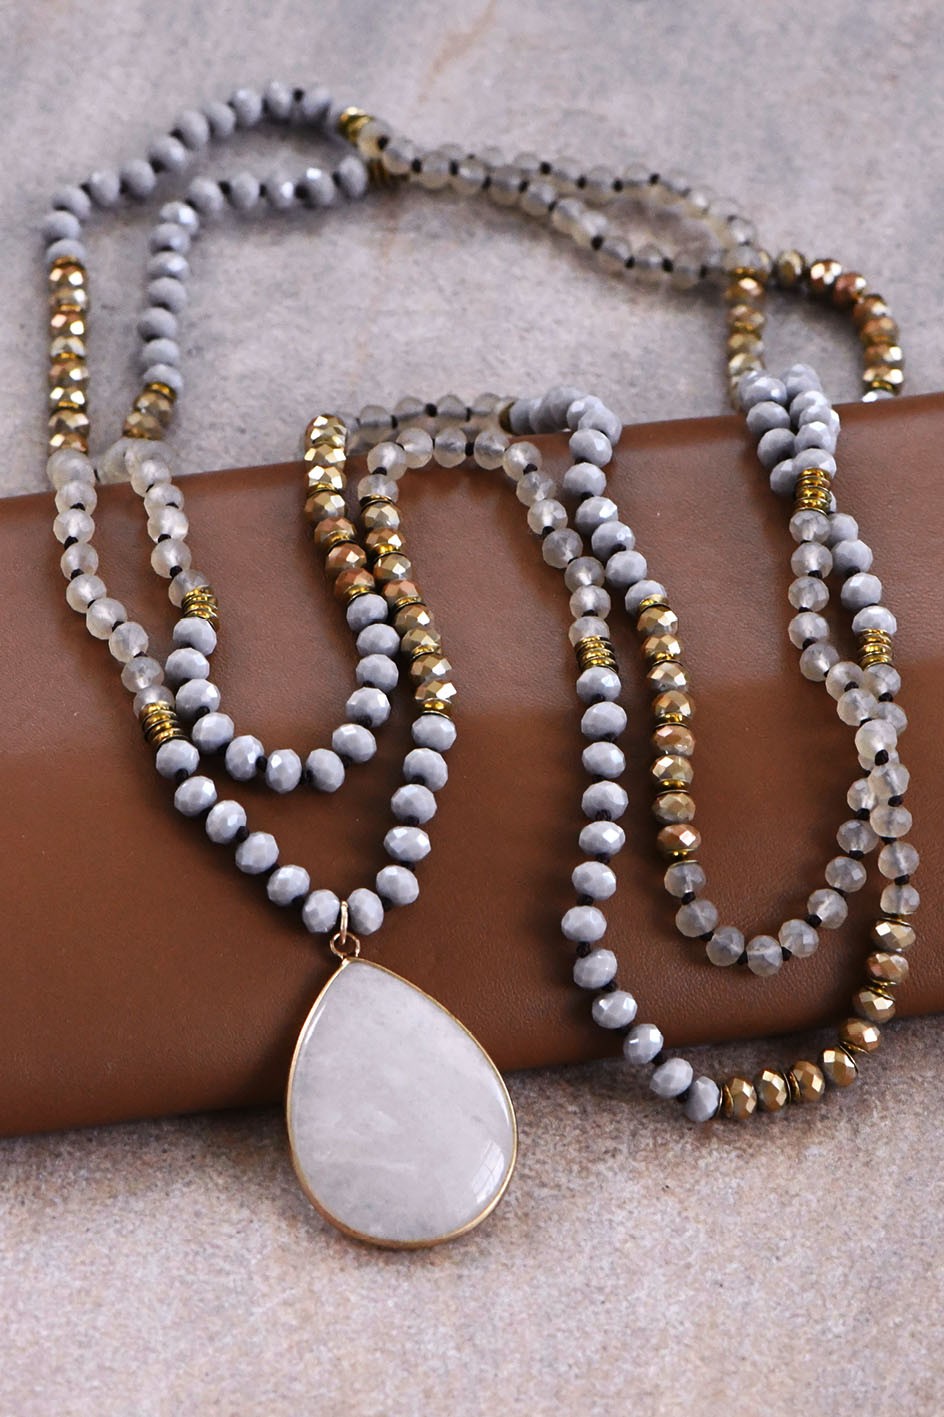 Long Beaded Wrap Necklace with Stone Drop Pendant-Gray